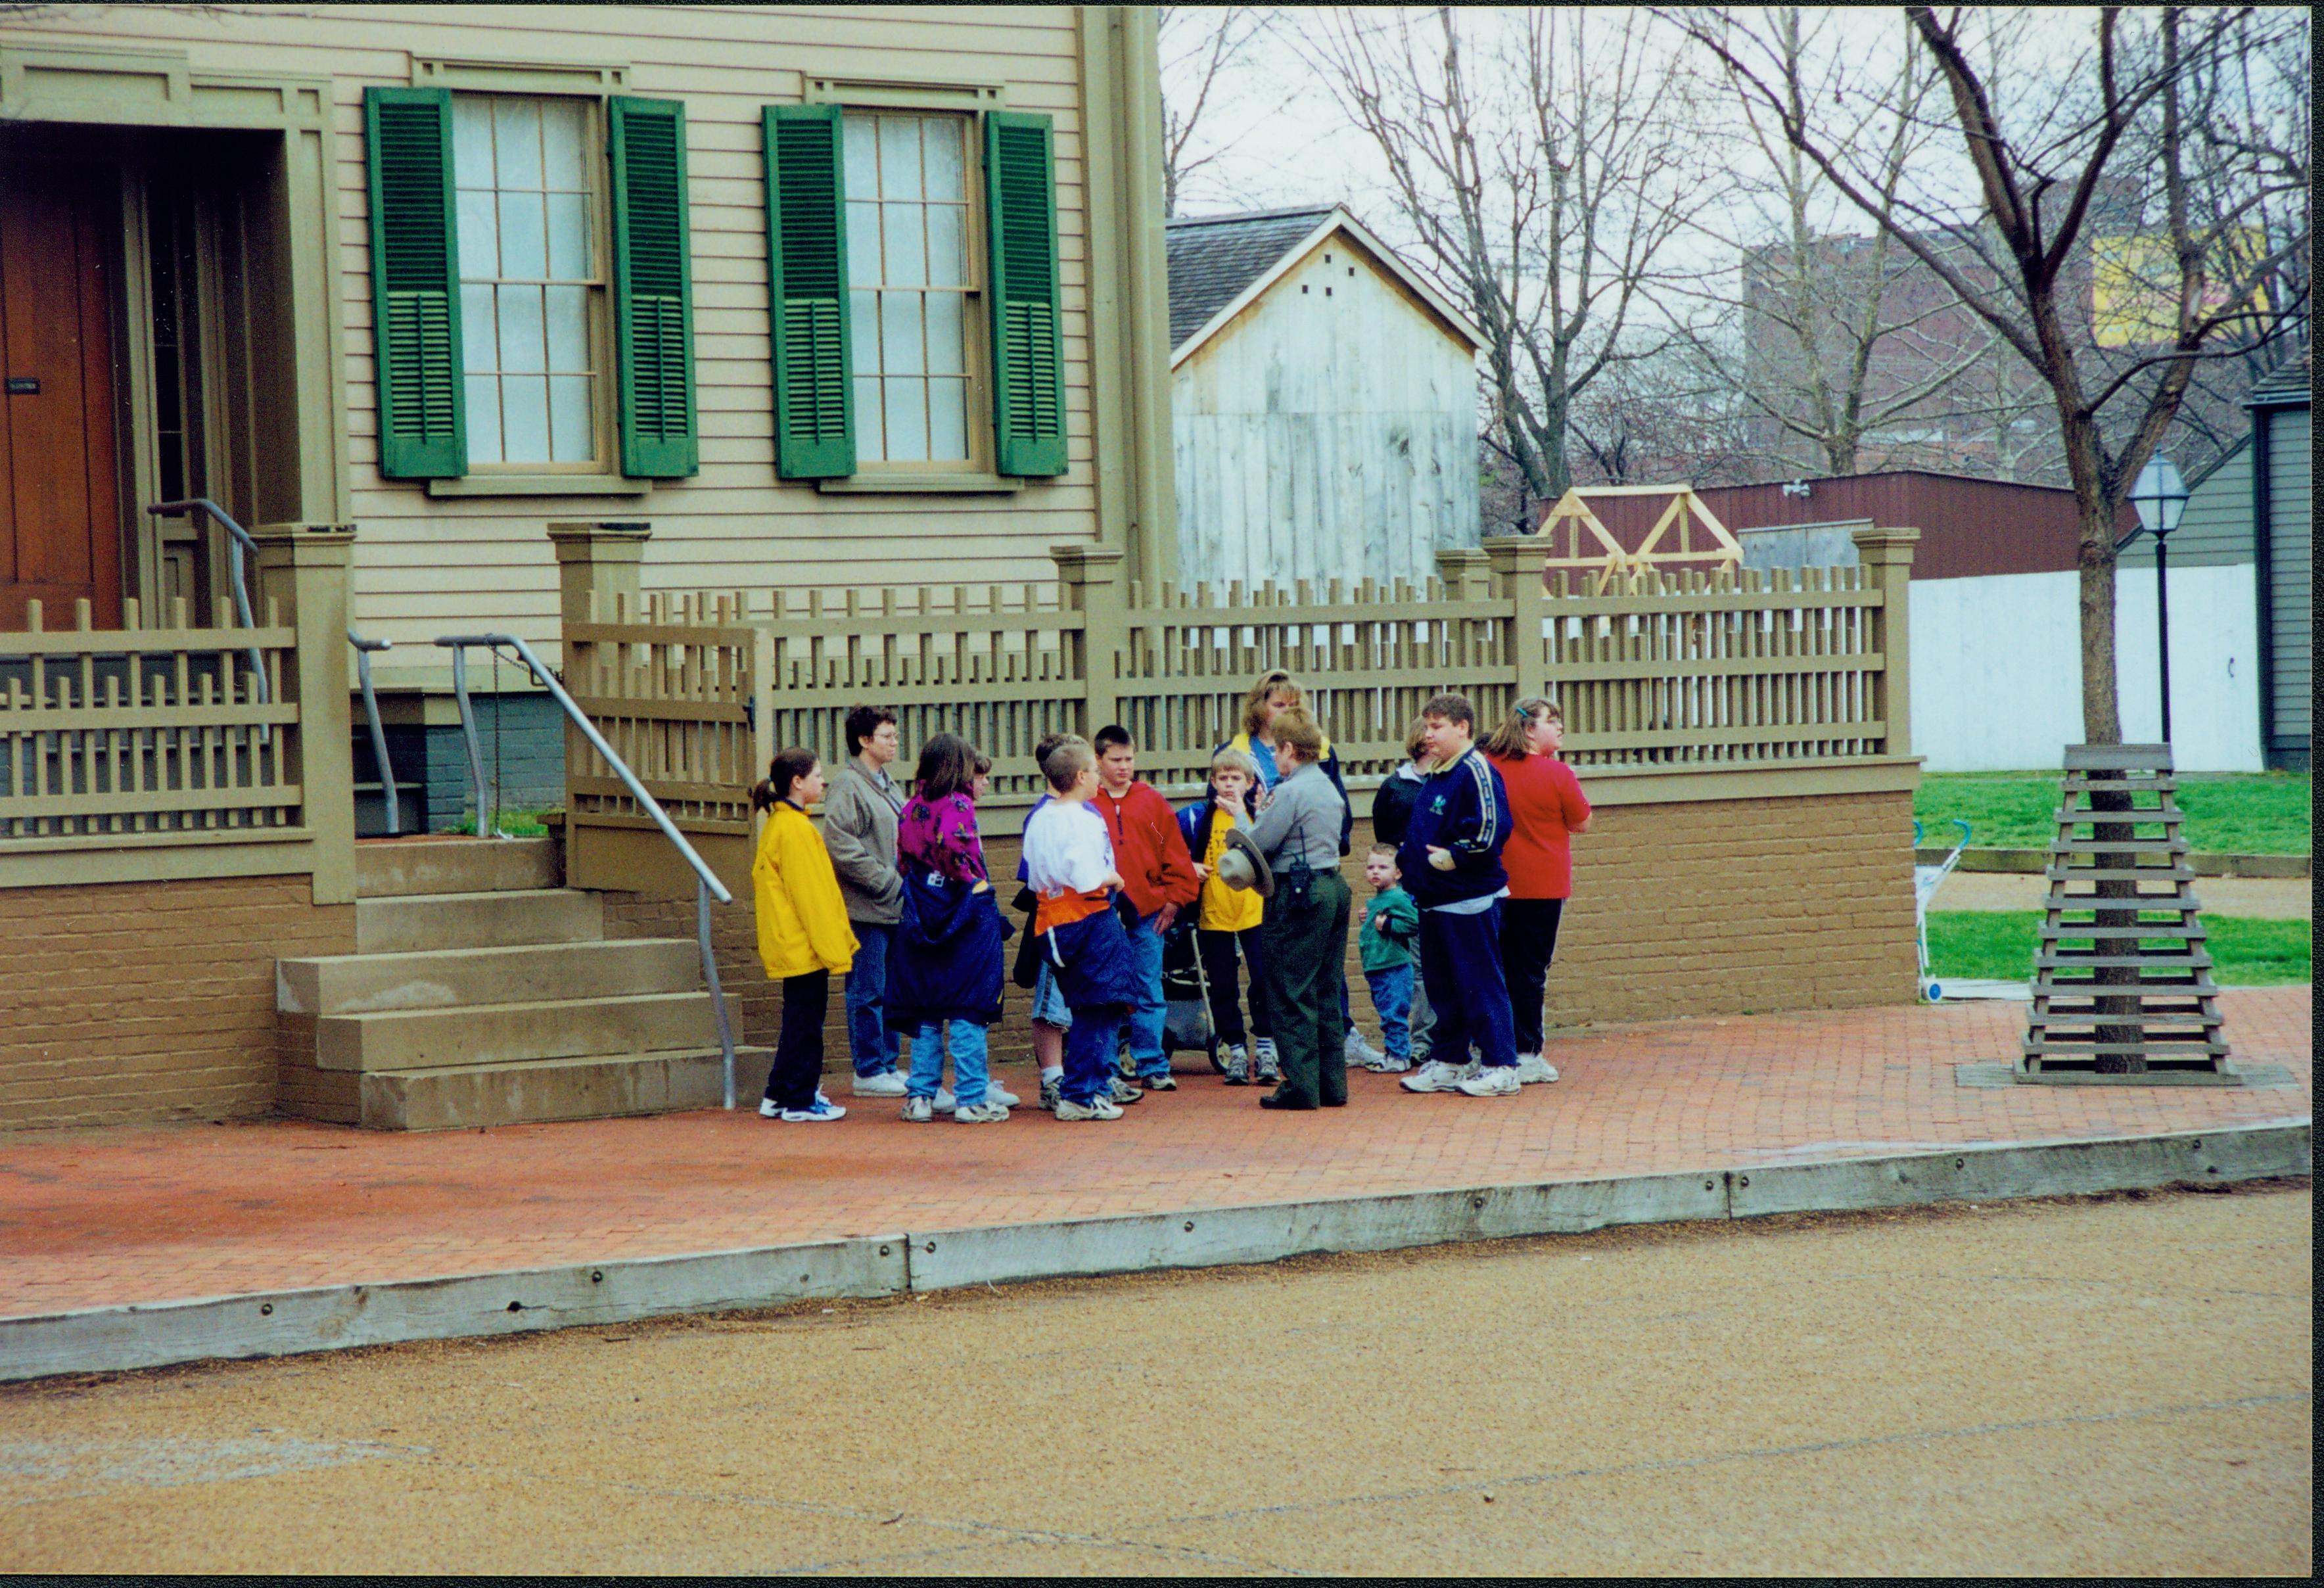 Interpreter Judy Winkelmann speaks with a small group of students in front of the Lincoln Home. Photographer facing south east.